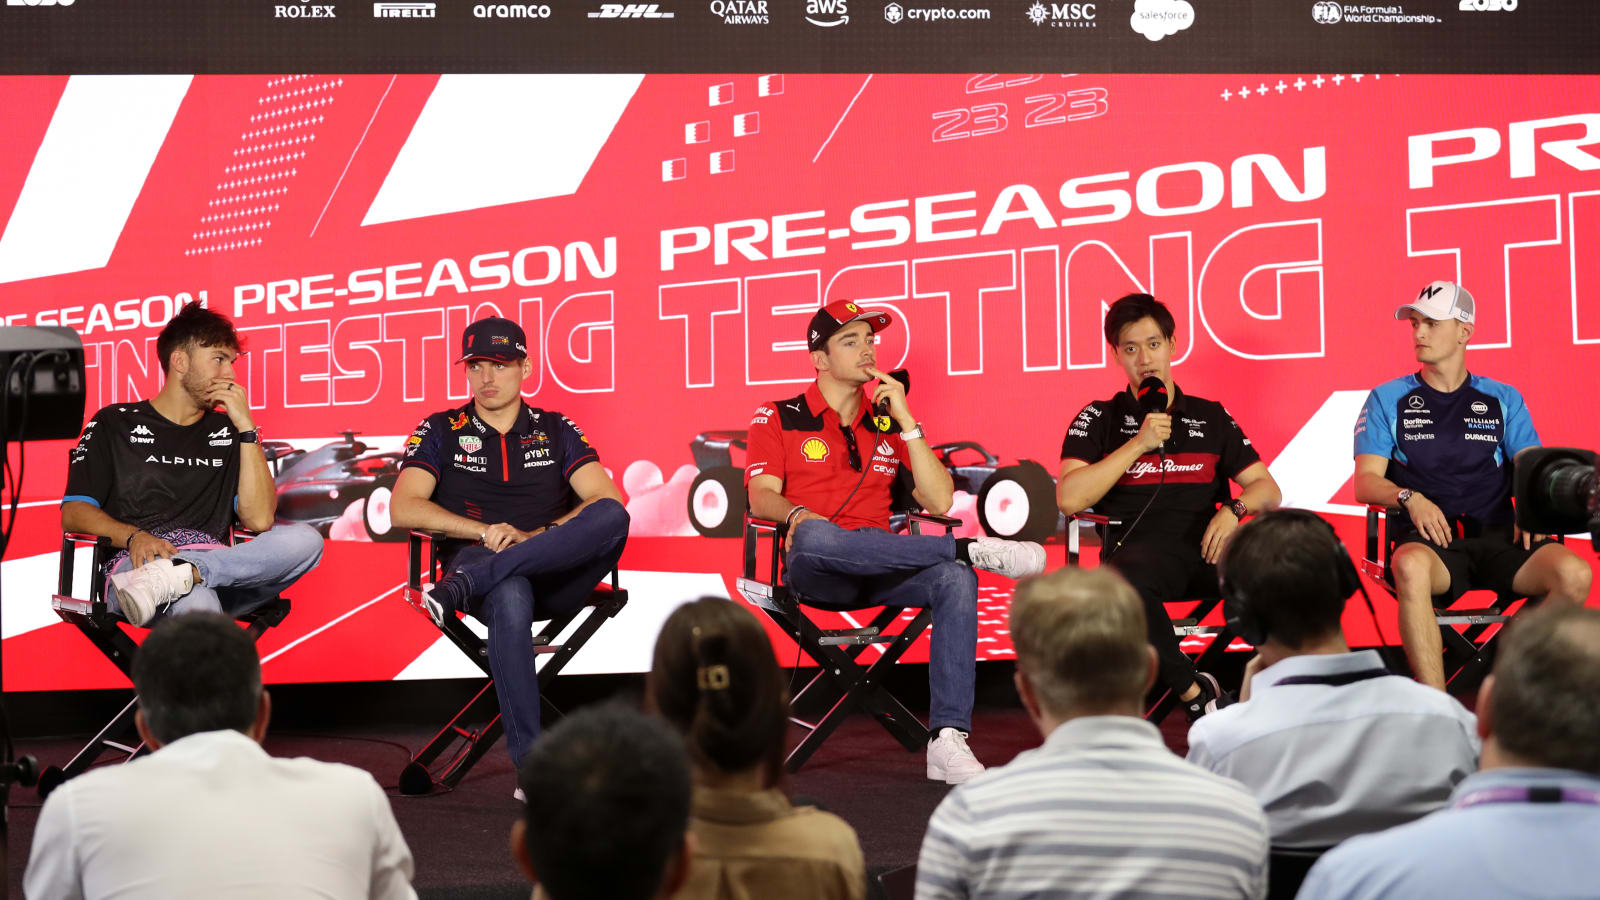 BAHRAIN, BAHRAIN - FEBRUARY 25: (LR) Pierre Gasly and Alpine F1 of France, Max Verstappen and Oracle Red Bull Racing of the Netherlands, Charles Leclerc and Ferrari of Monaco, Zhou Guanyu and Alfa Romeo F1 of China and Logan Sargent of the United States and Williams attend the Drivers' Press Conference on the third day of F1 testing at Bahrain International Circuit on February 25, 2023 in Bahrain, Bahrain.  (Photo by Peter Fox / Getty Images)